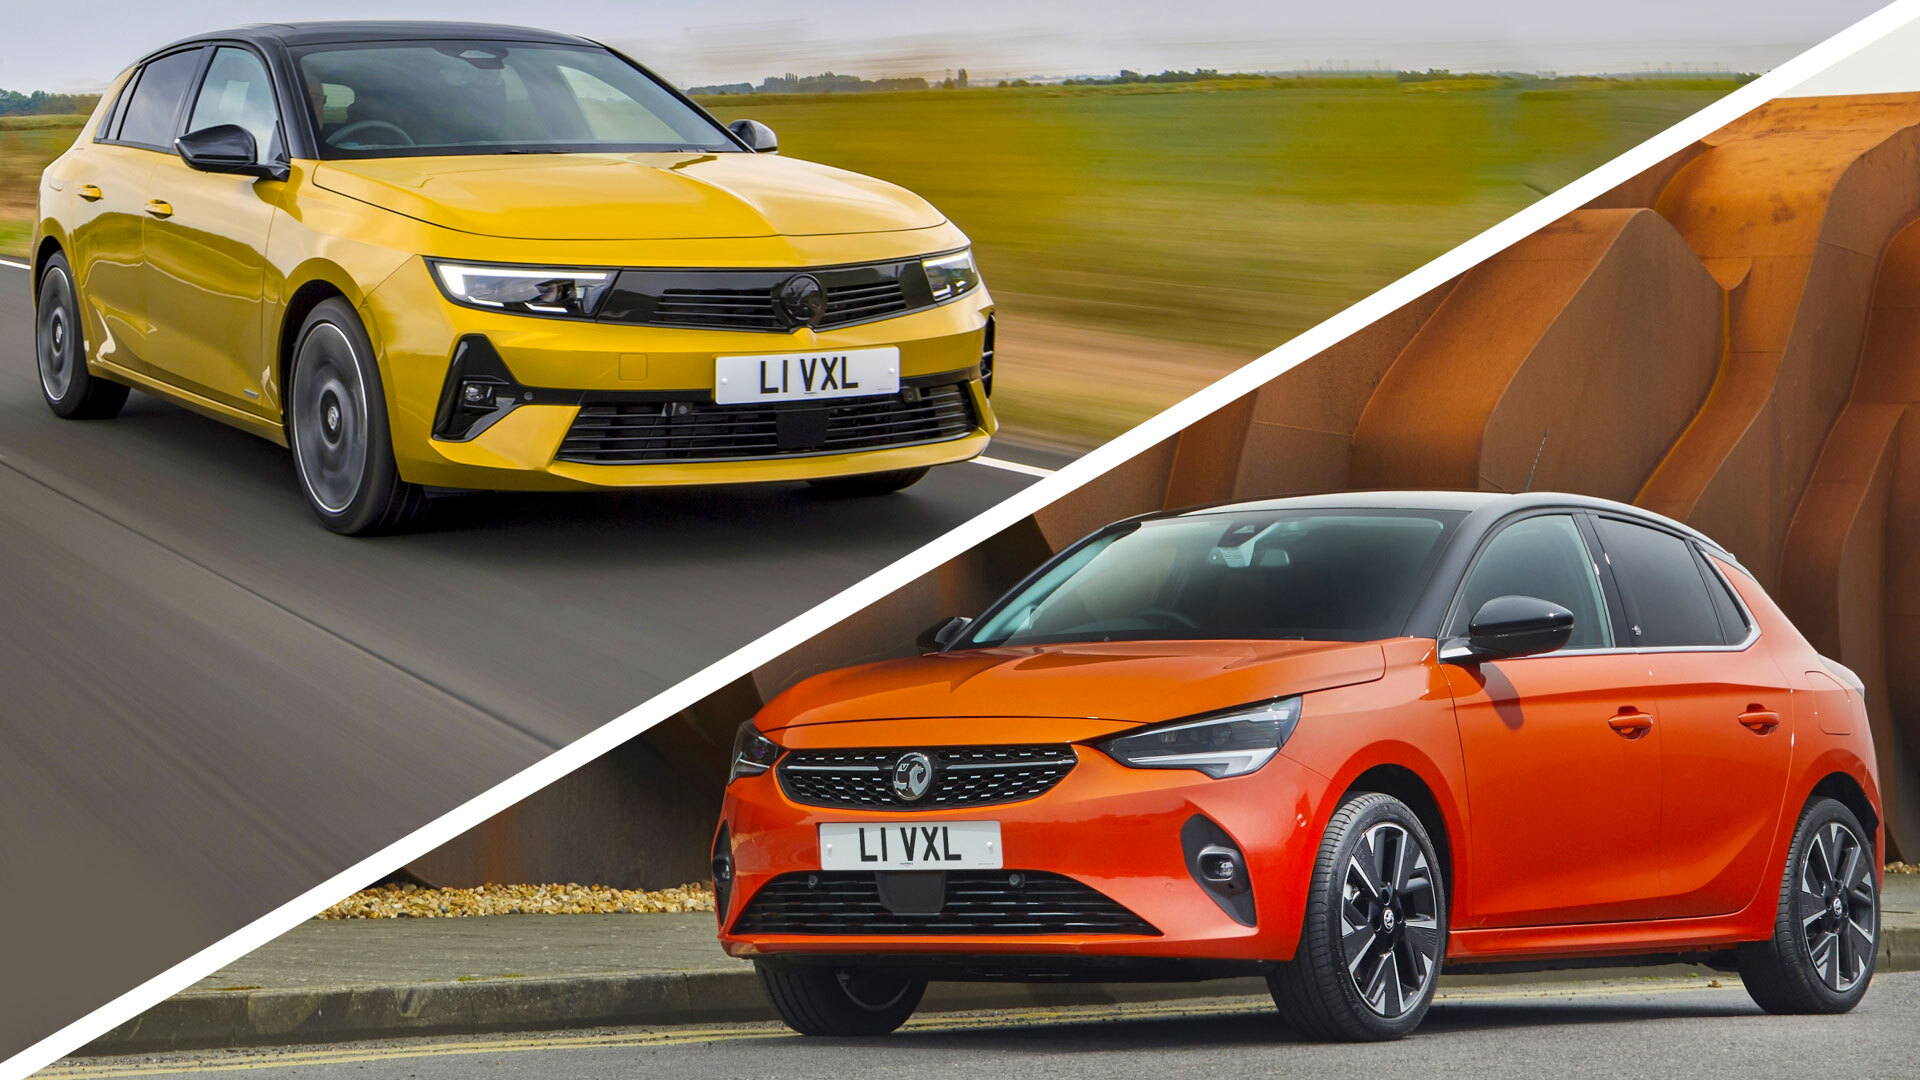 Vauxhall Astra vs Corsa: Which is best?